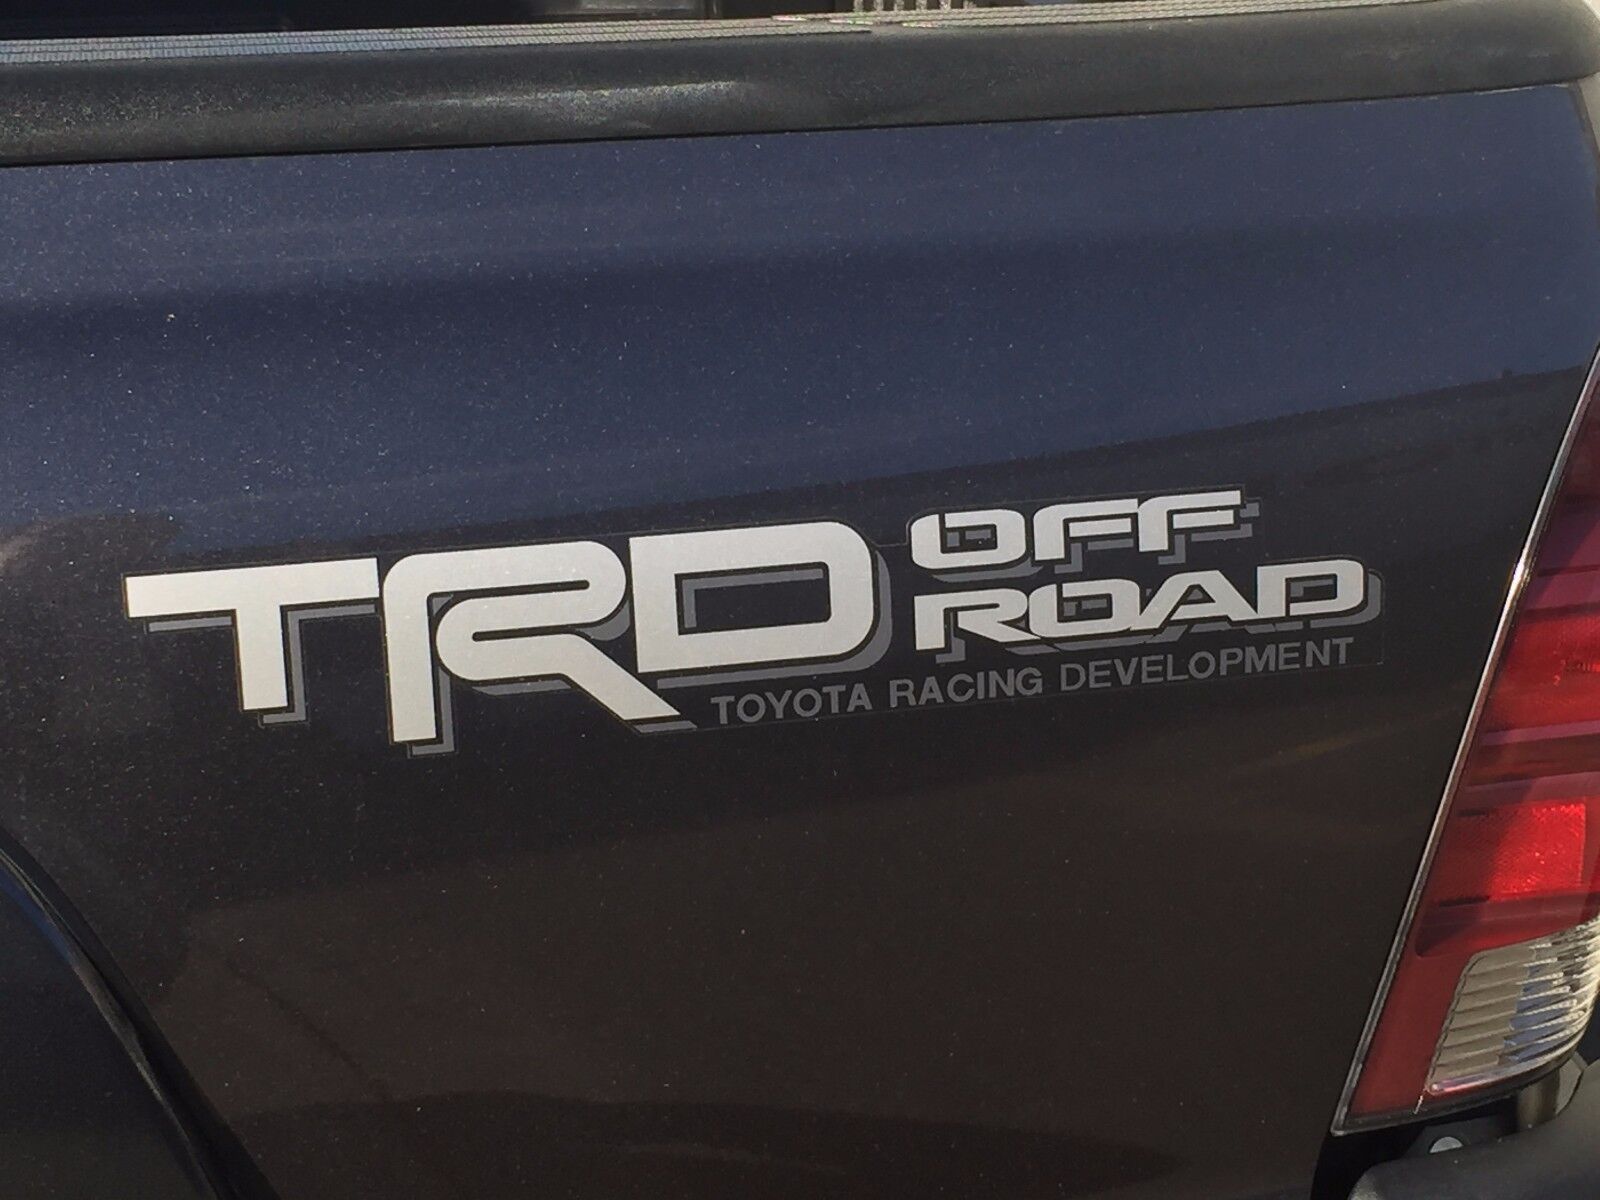 Toyota Tacoma TRD Off-Road bedside decal Silver/Gray PT211-TT980-28 Genuine OEM